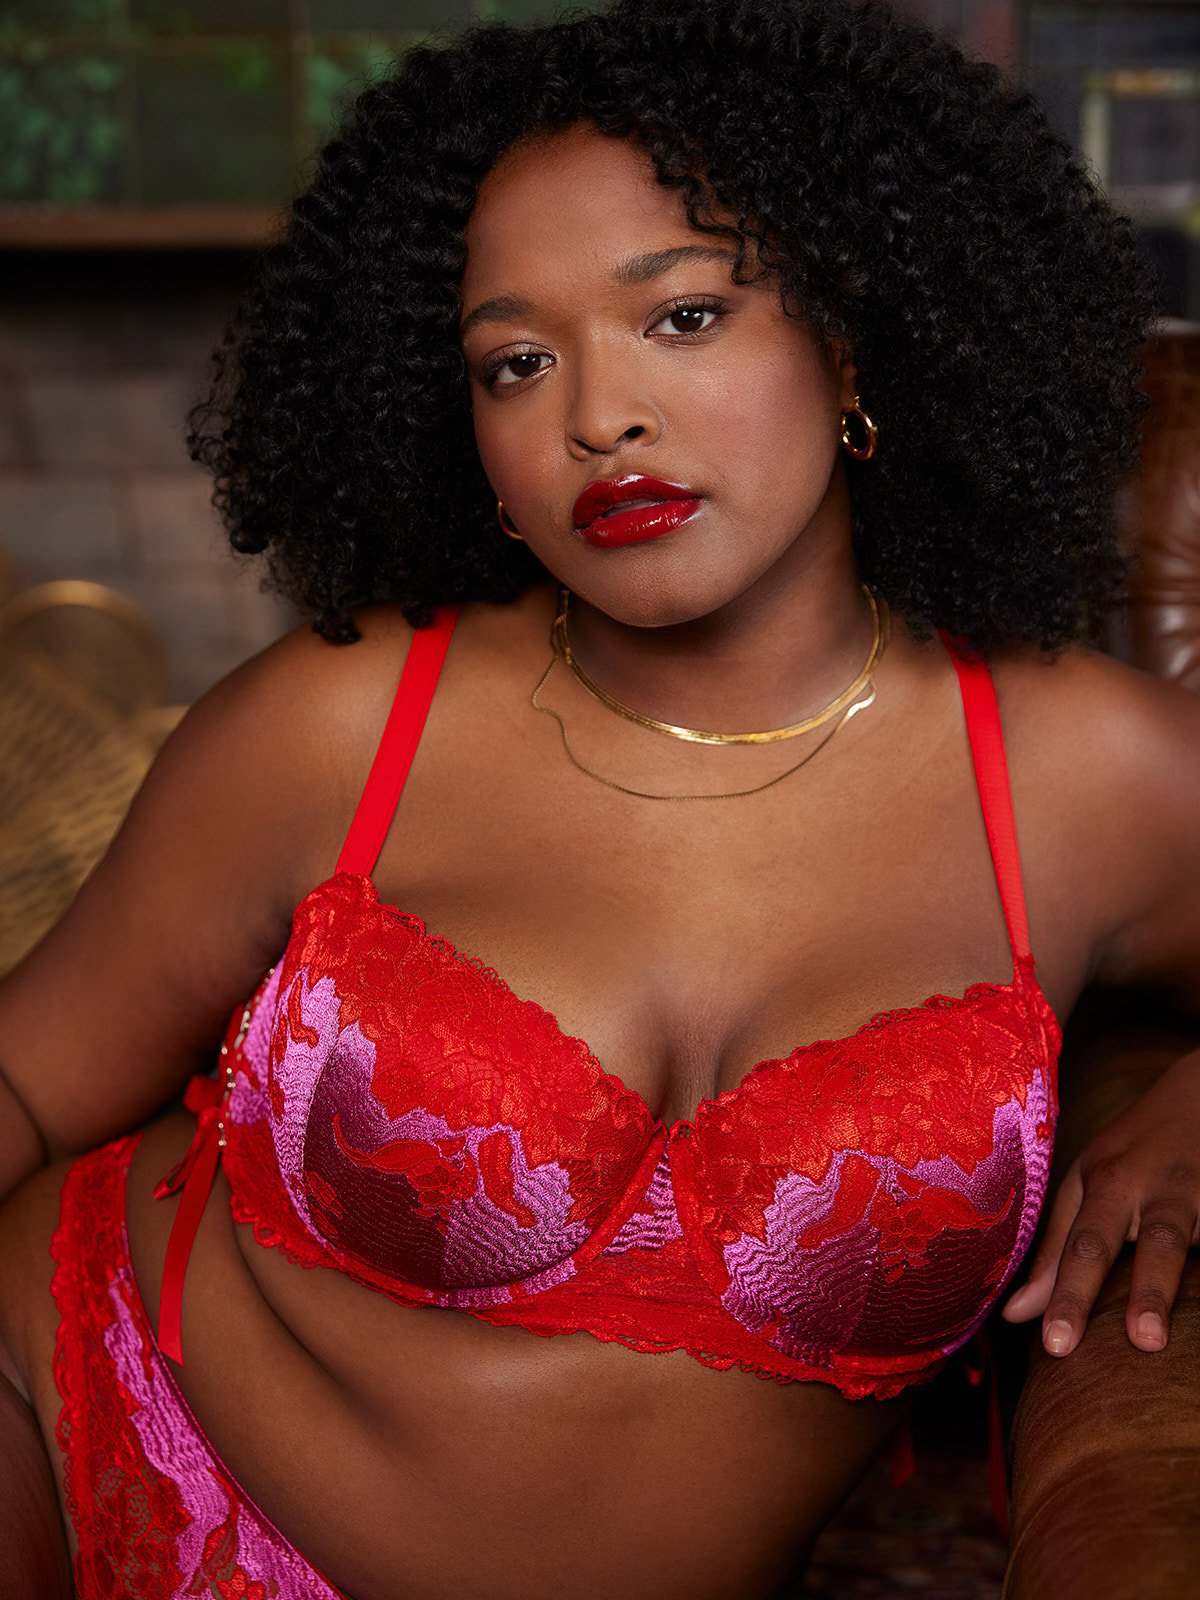 Lace'd Up Padded Low Balconette Bra in Multi & Pink & Red